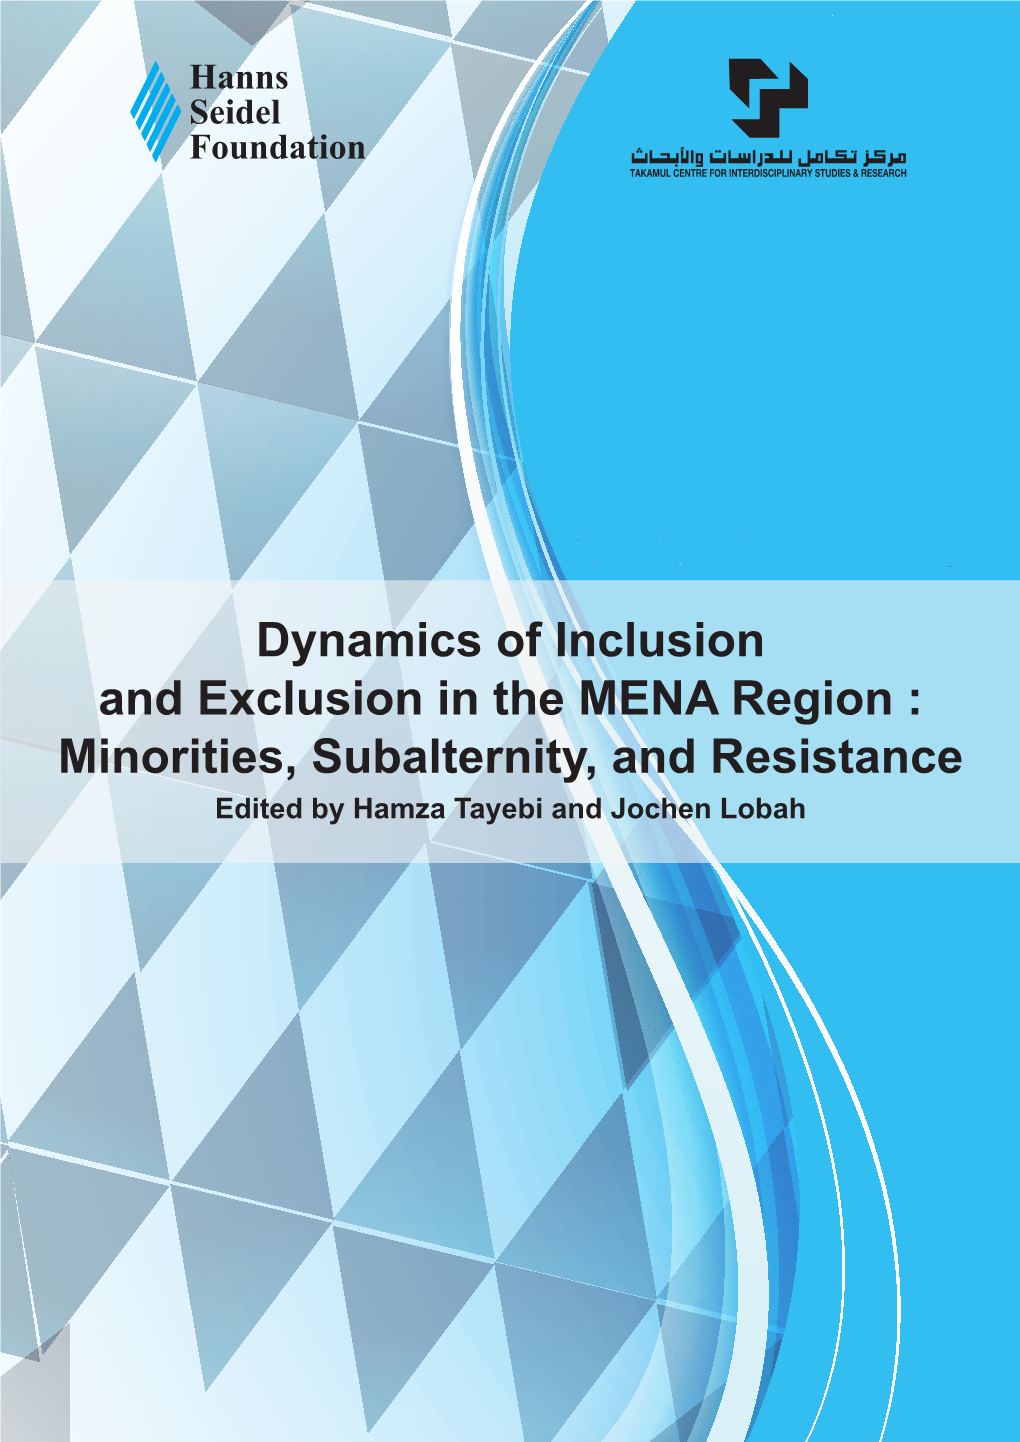 Download Dynamics of Inclusion and Exclusion in the MENA Region